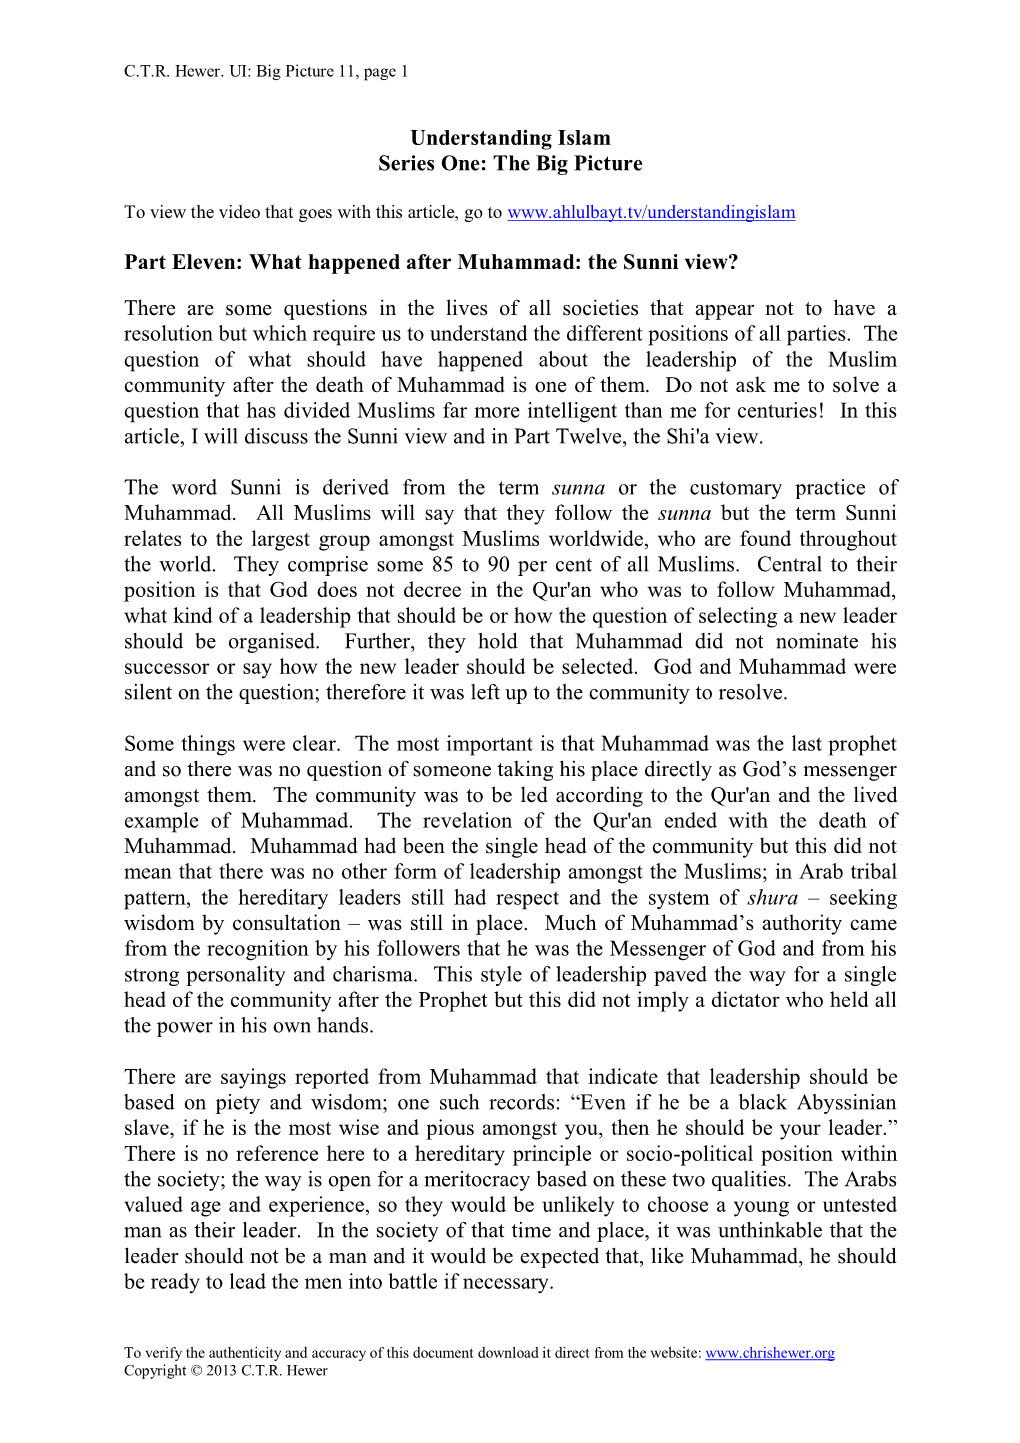 What Happened After Muhammad: the Sunni View? There Are Some Questi